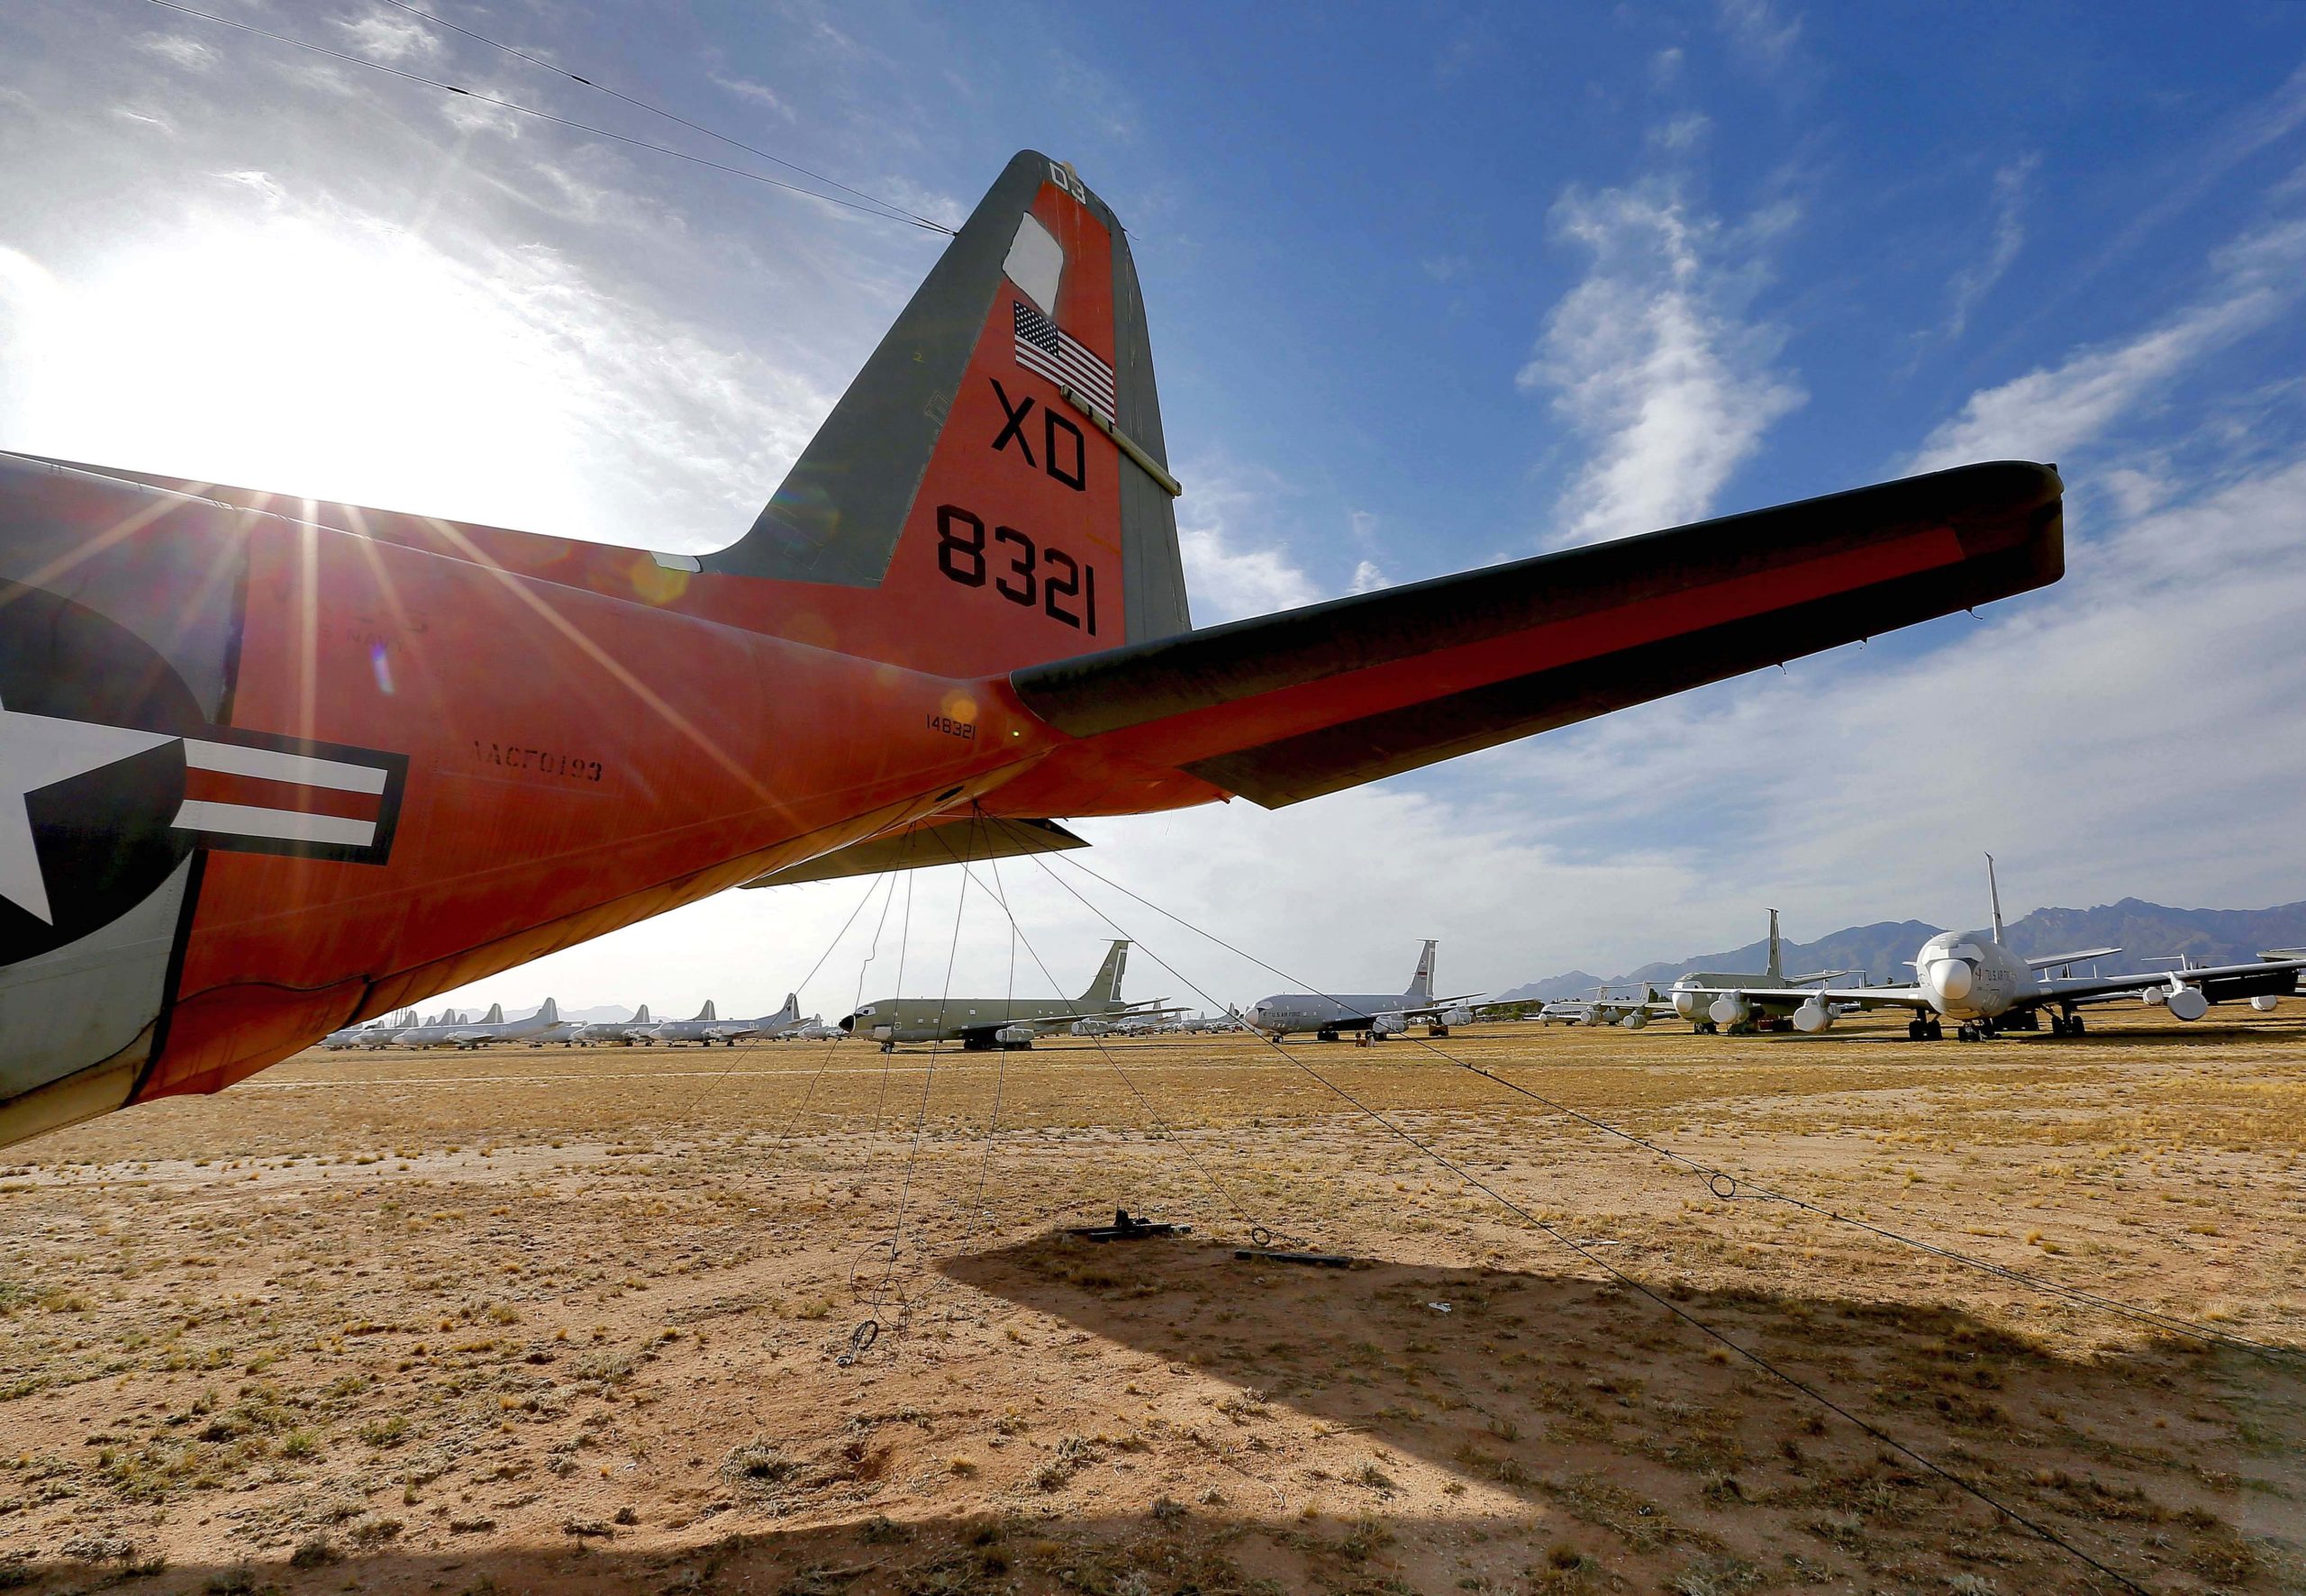 The Eerie Boneyard Where Military Aircrafts Go To Die